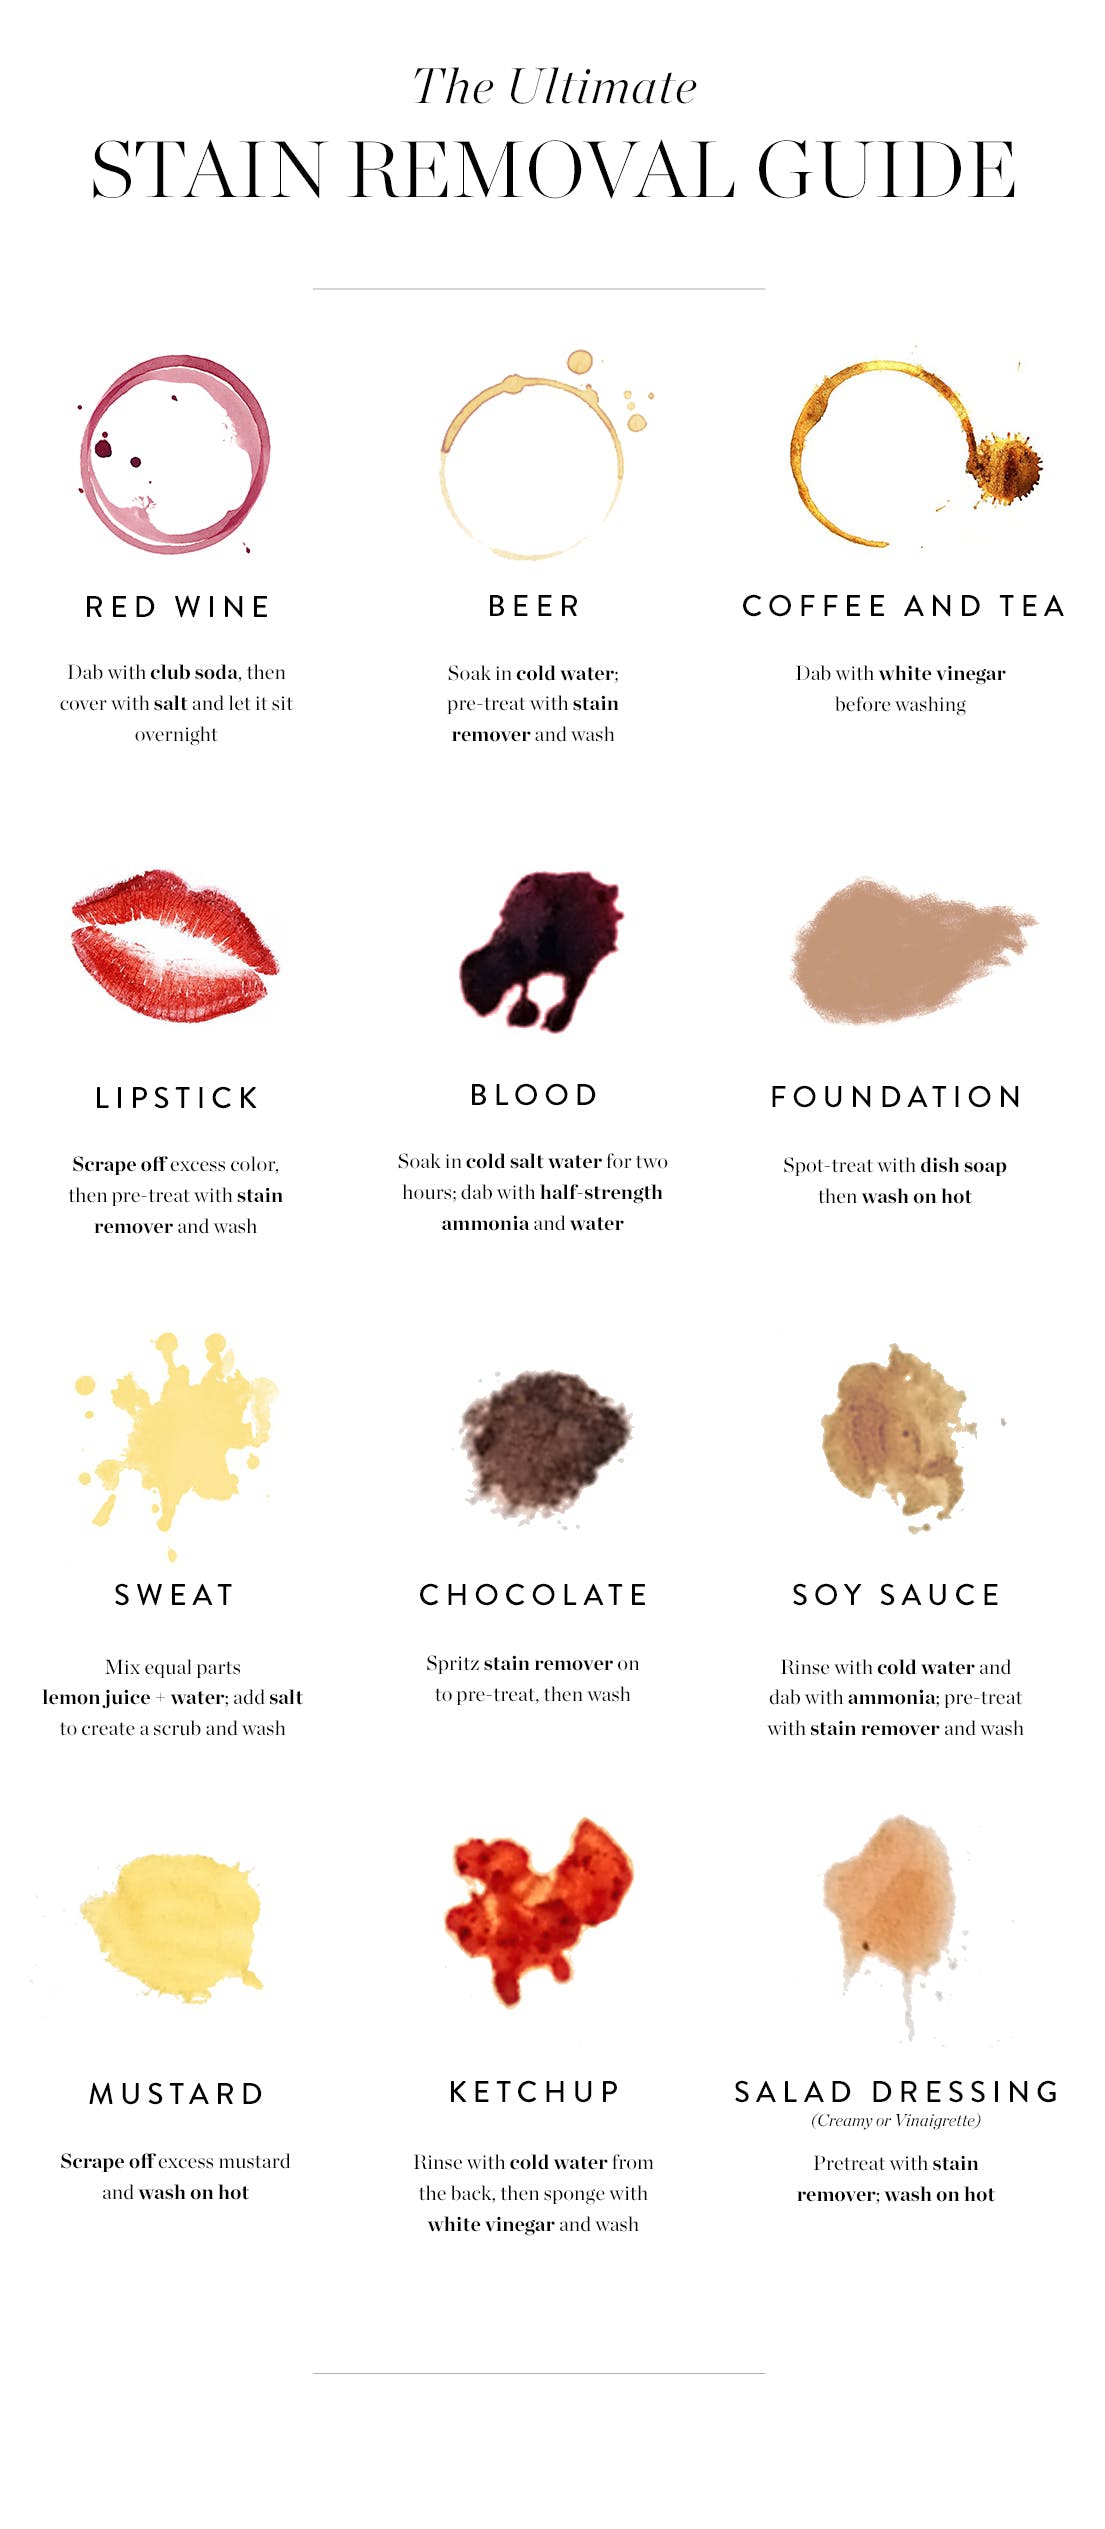 infographics and charts - ultimate stain removal guide - The Ultimate Stain Removal Guide Red Wine Dab with club soda, then cover with salt and let it sit overnight Lipstick Scrape off excess color, then pretreat with stain remover and wash Sweat Mix equa